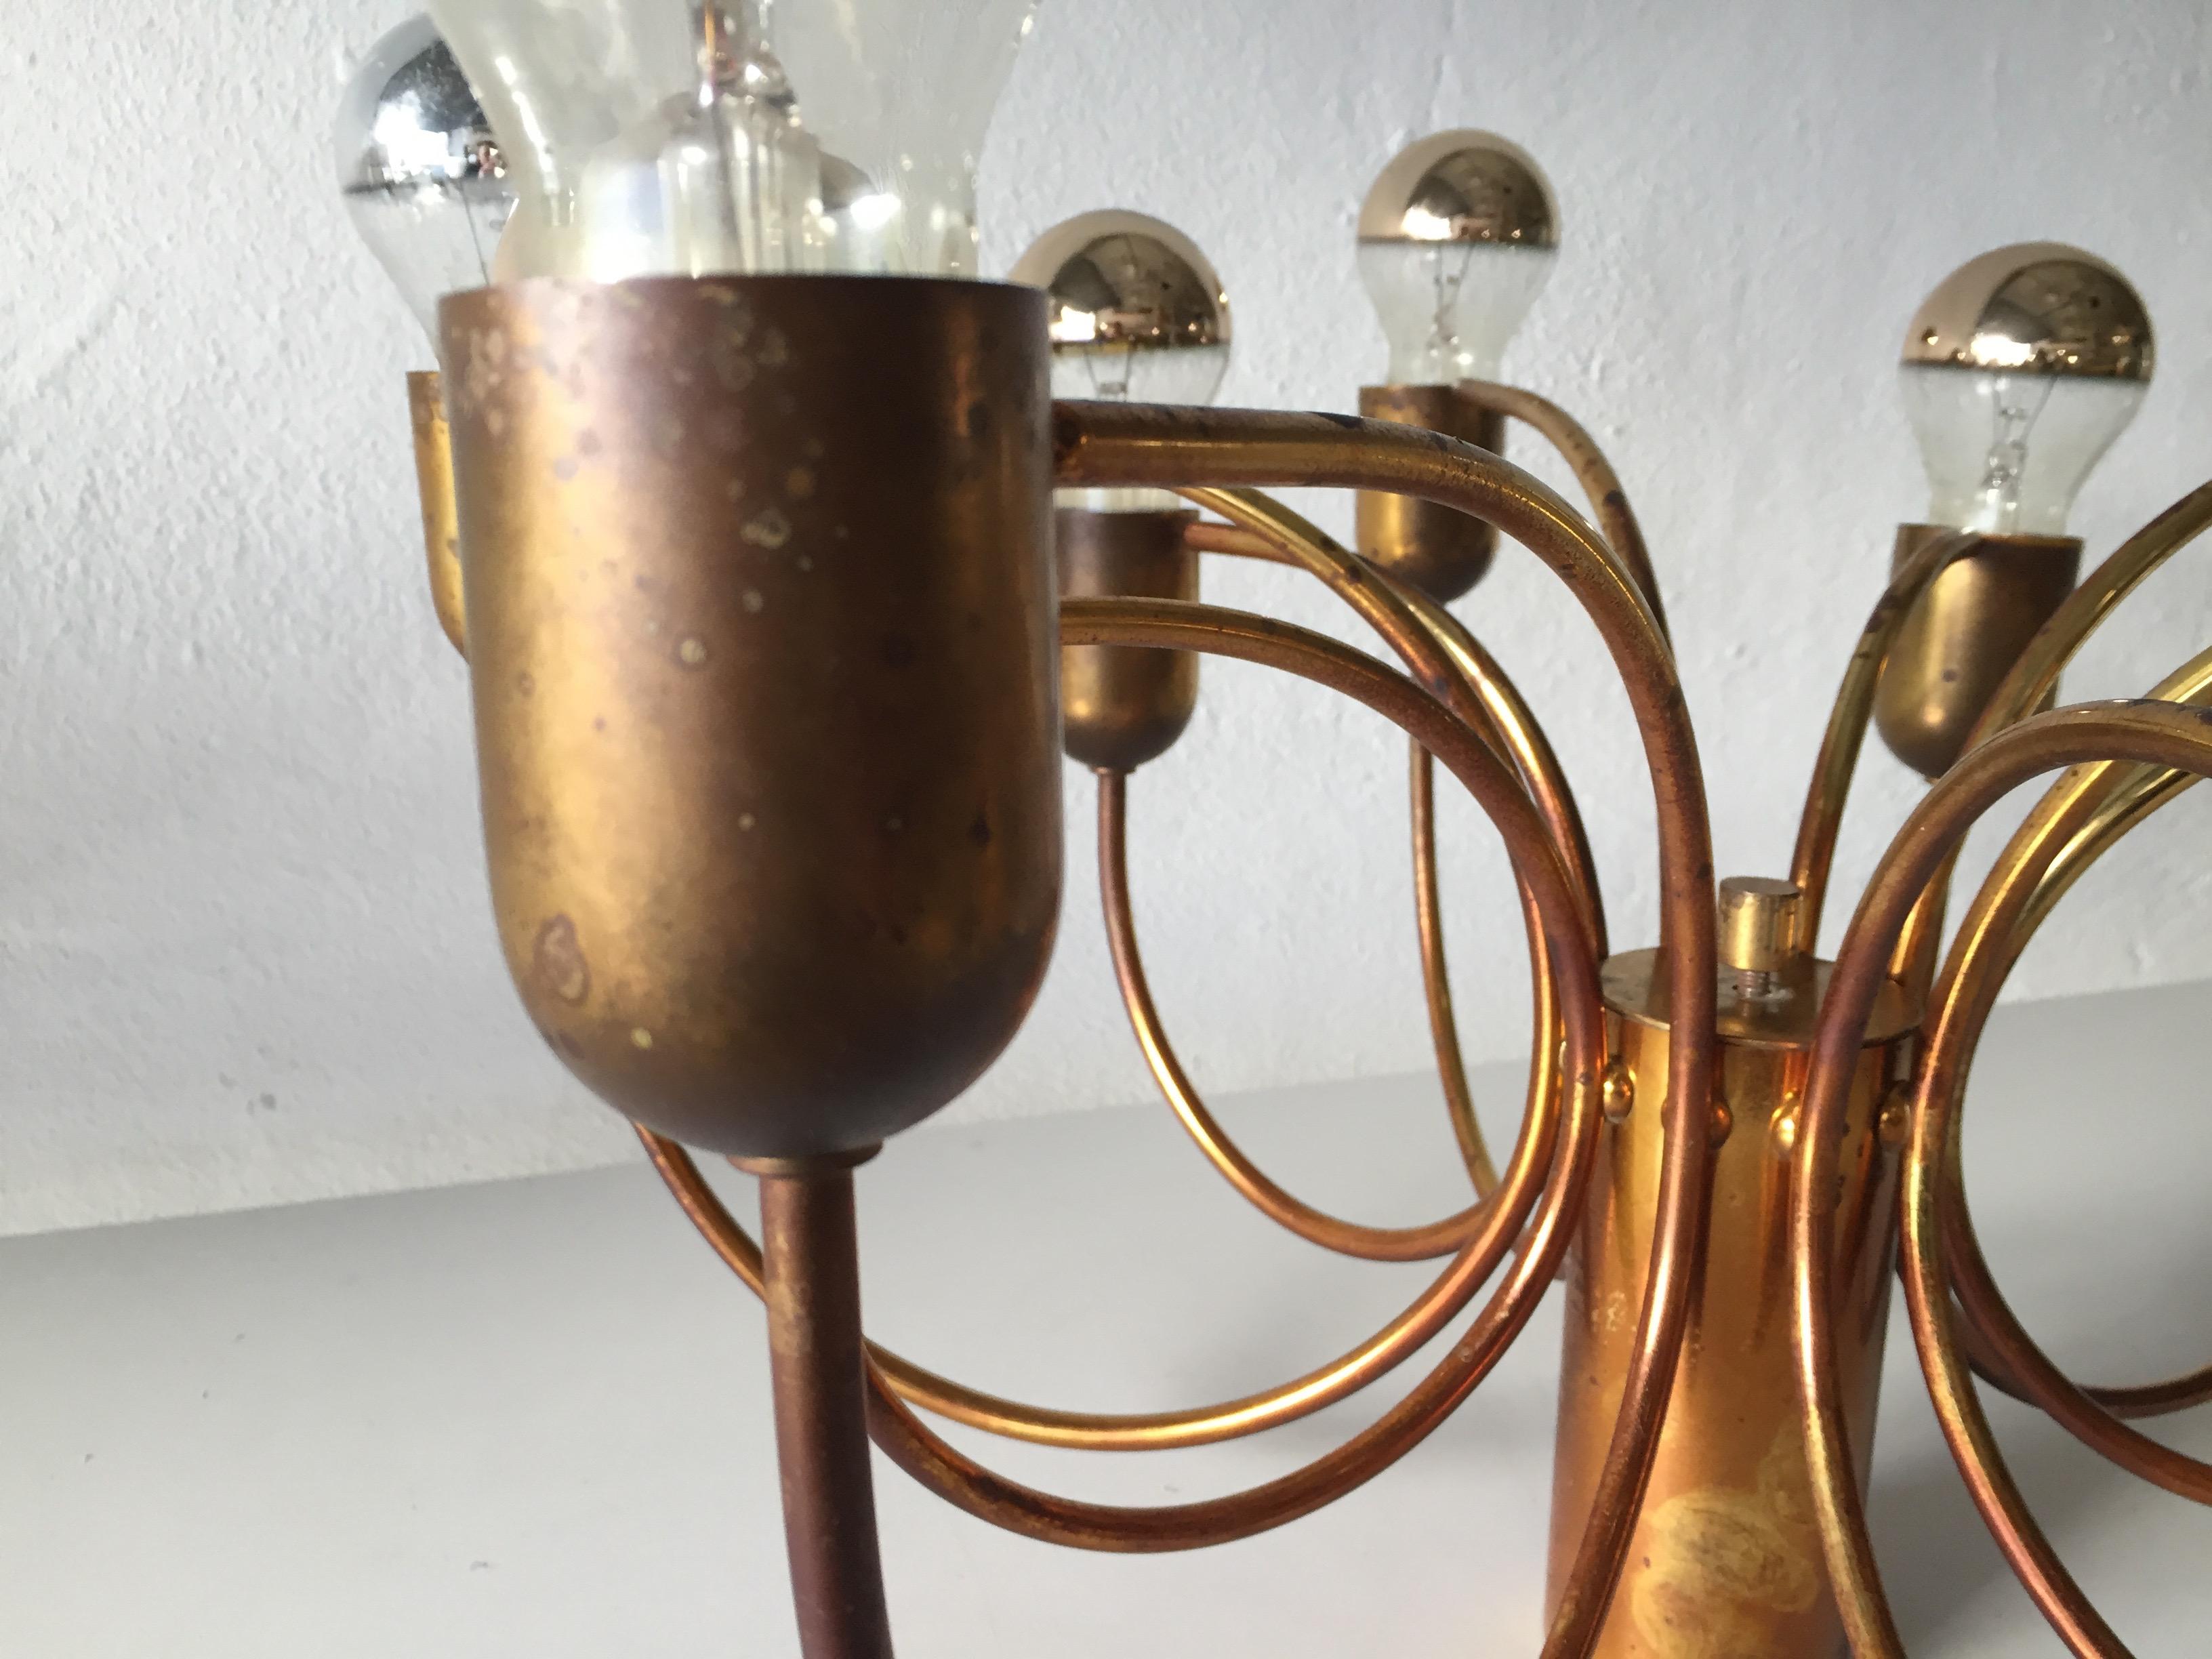 Rare 10 Arc Shaped Arms Full Brass Chandelier by Cosack Leuchten, 1970s Germany For Sale 1